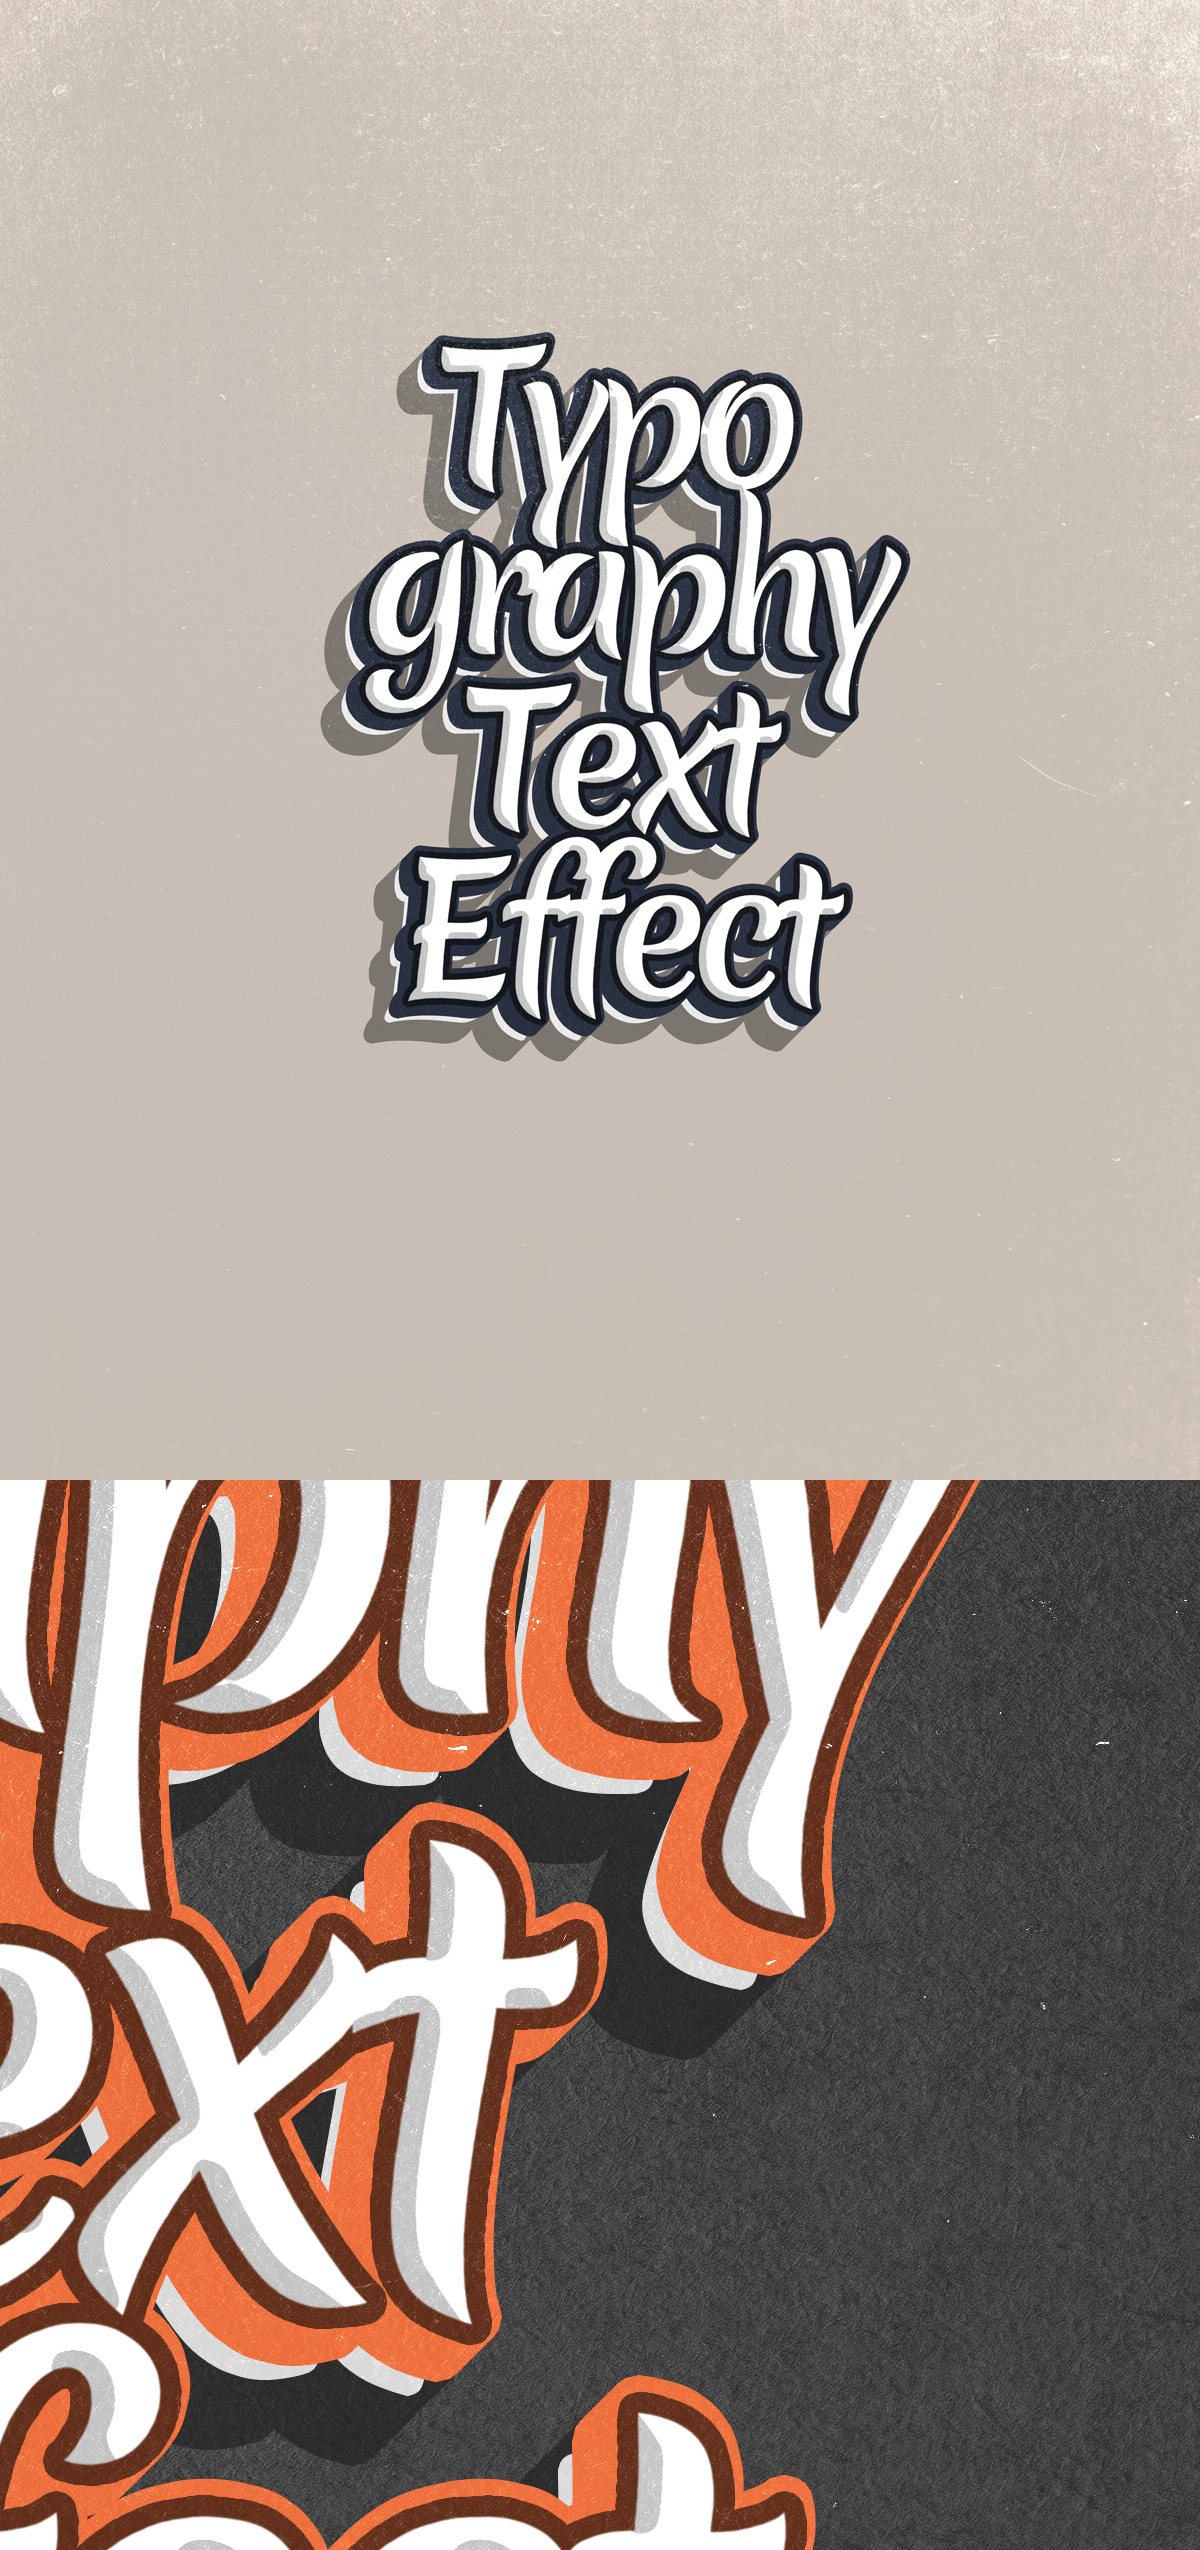 Hand-drawn Typographic Text Effect PSD